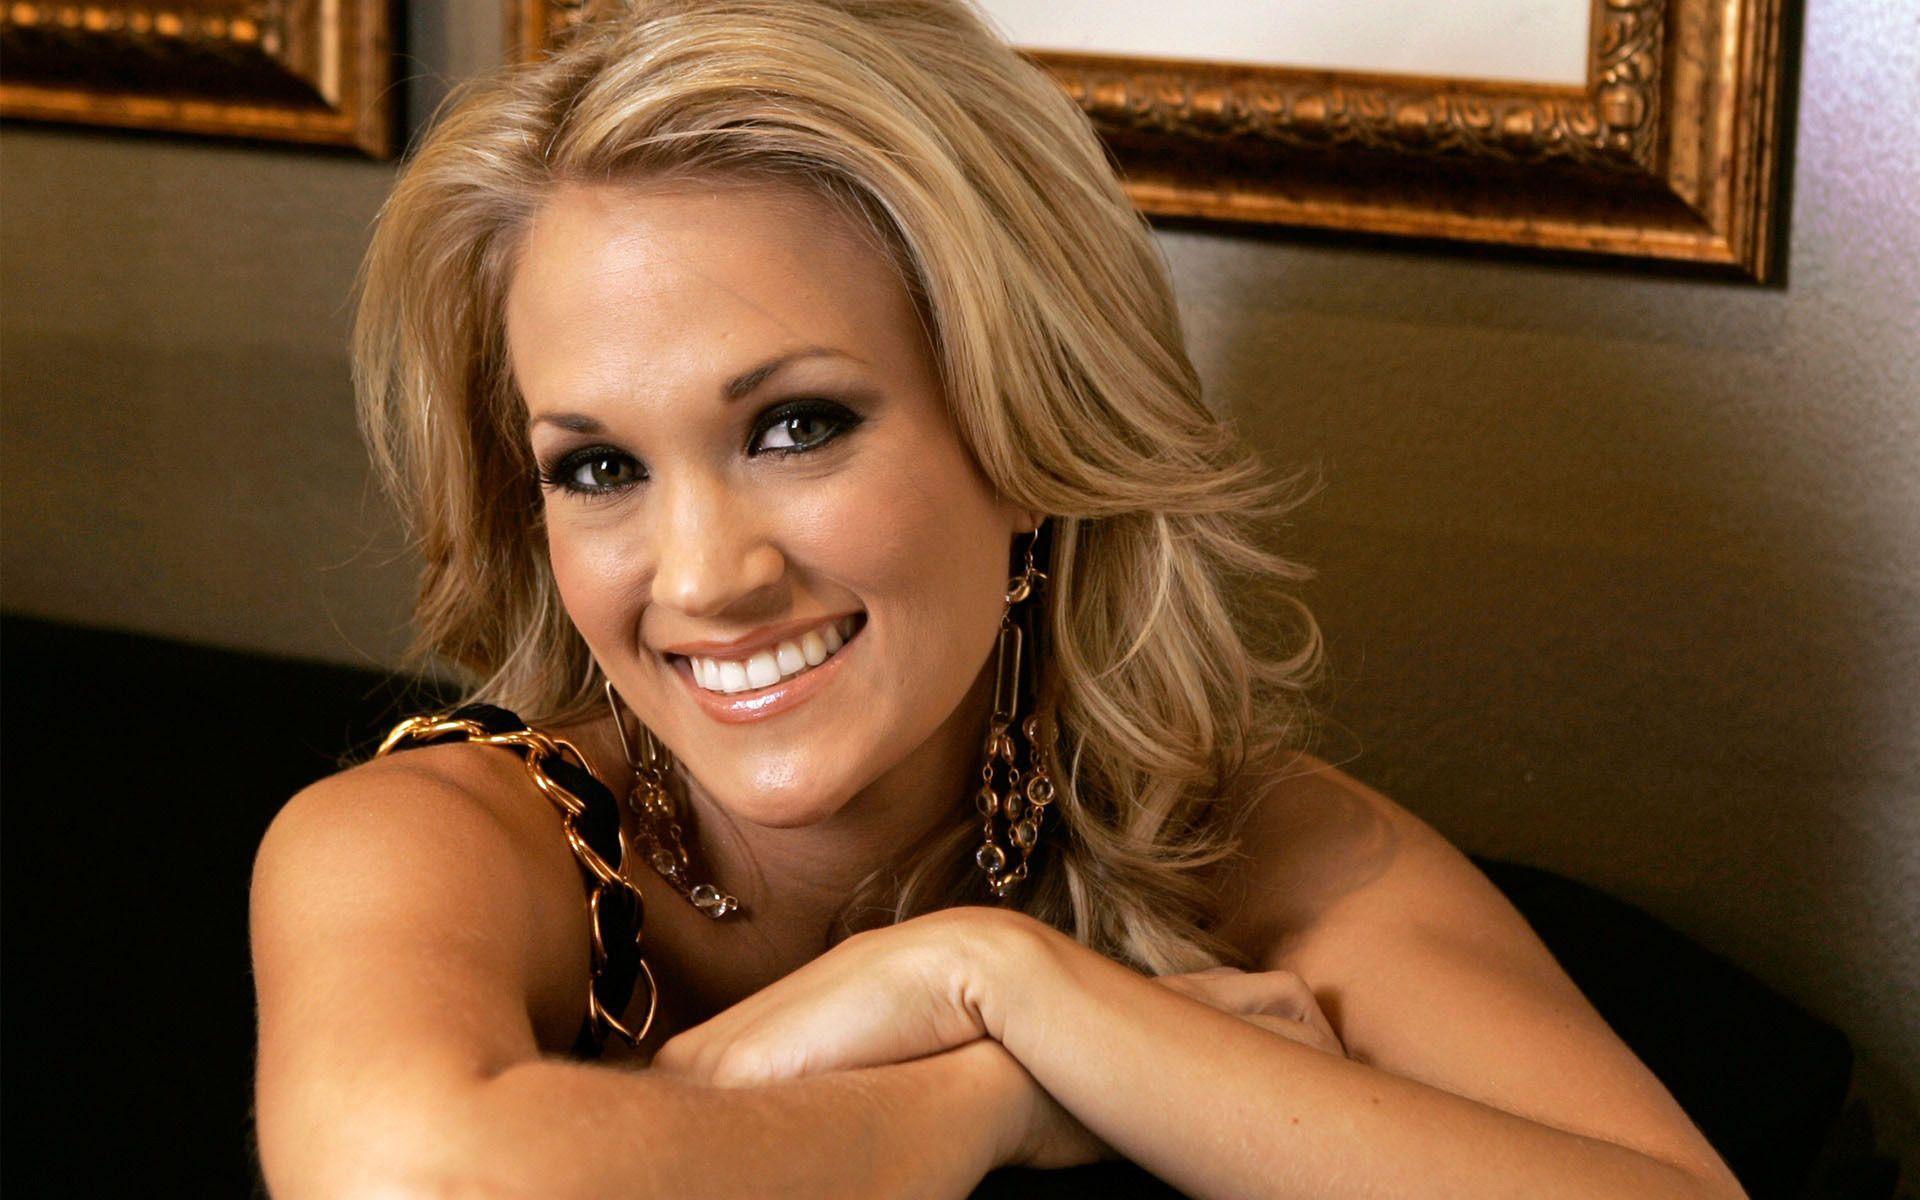 Carrie Underwood Picture 22633 High Resolution. HD Wallpaper